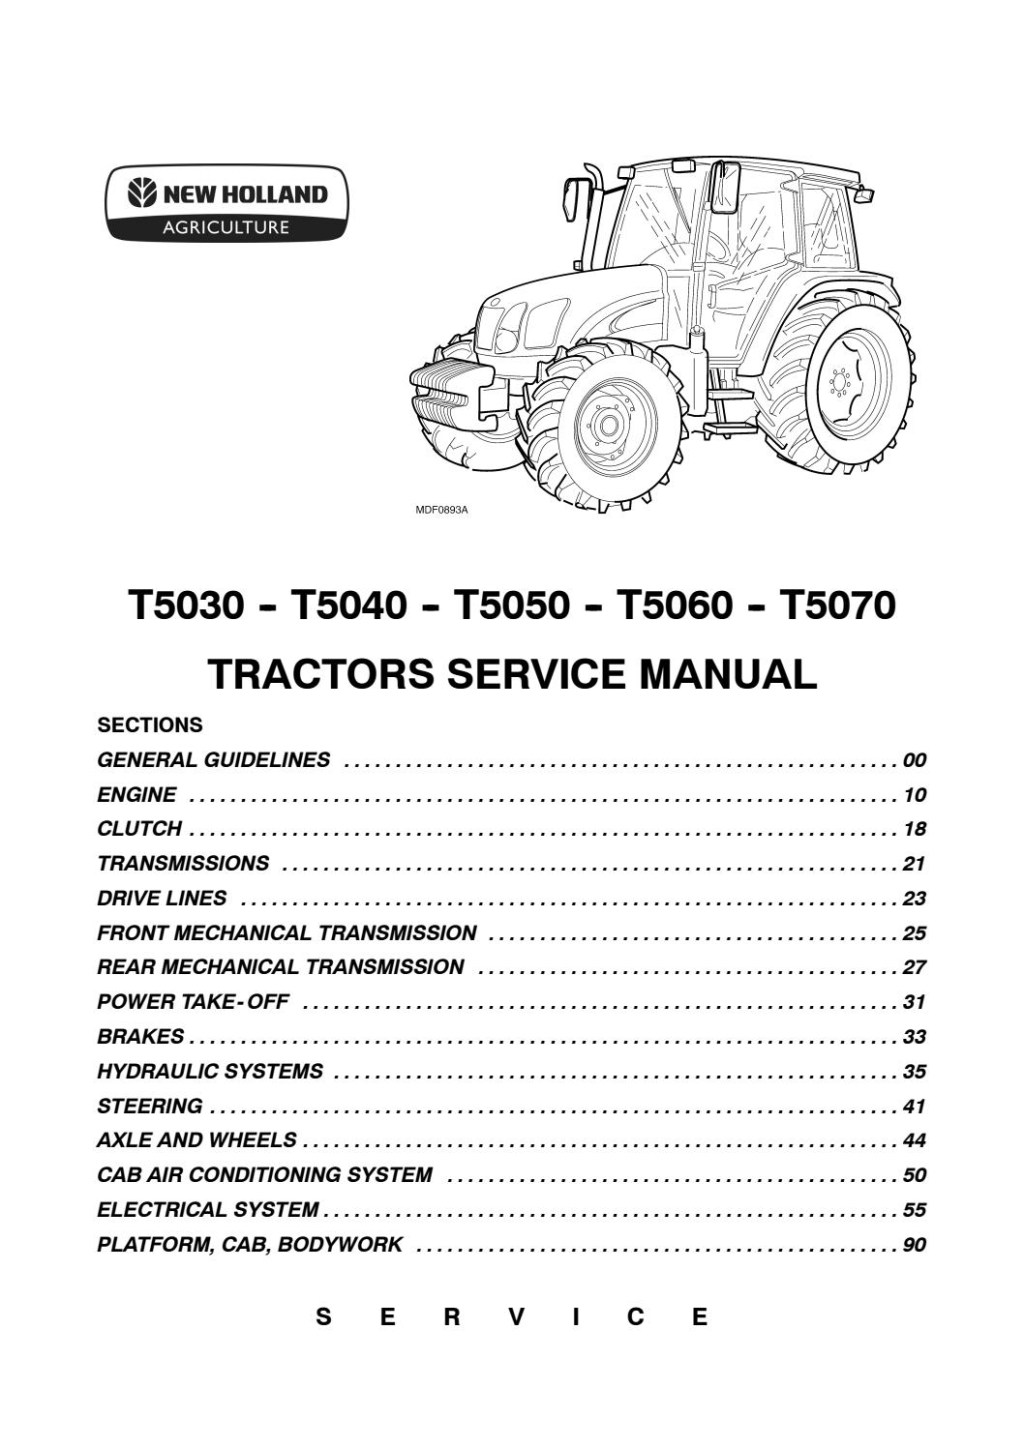 Picture of: New Holland T Tractor Service Repair Manual by kfmmsmez – Issuu